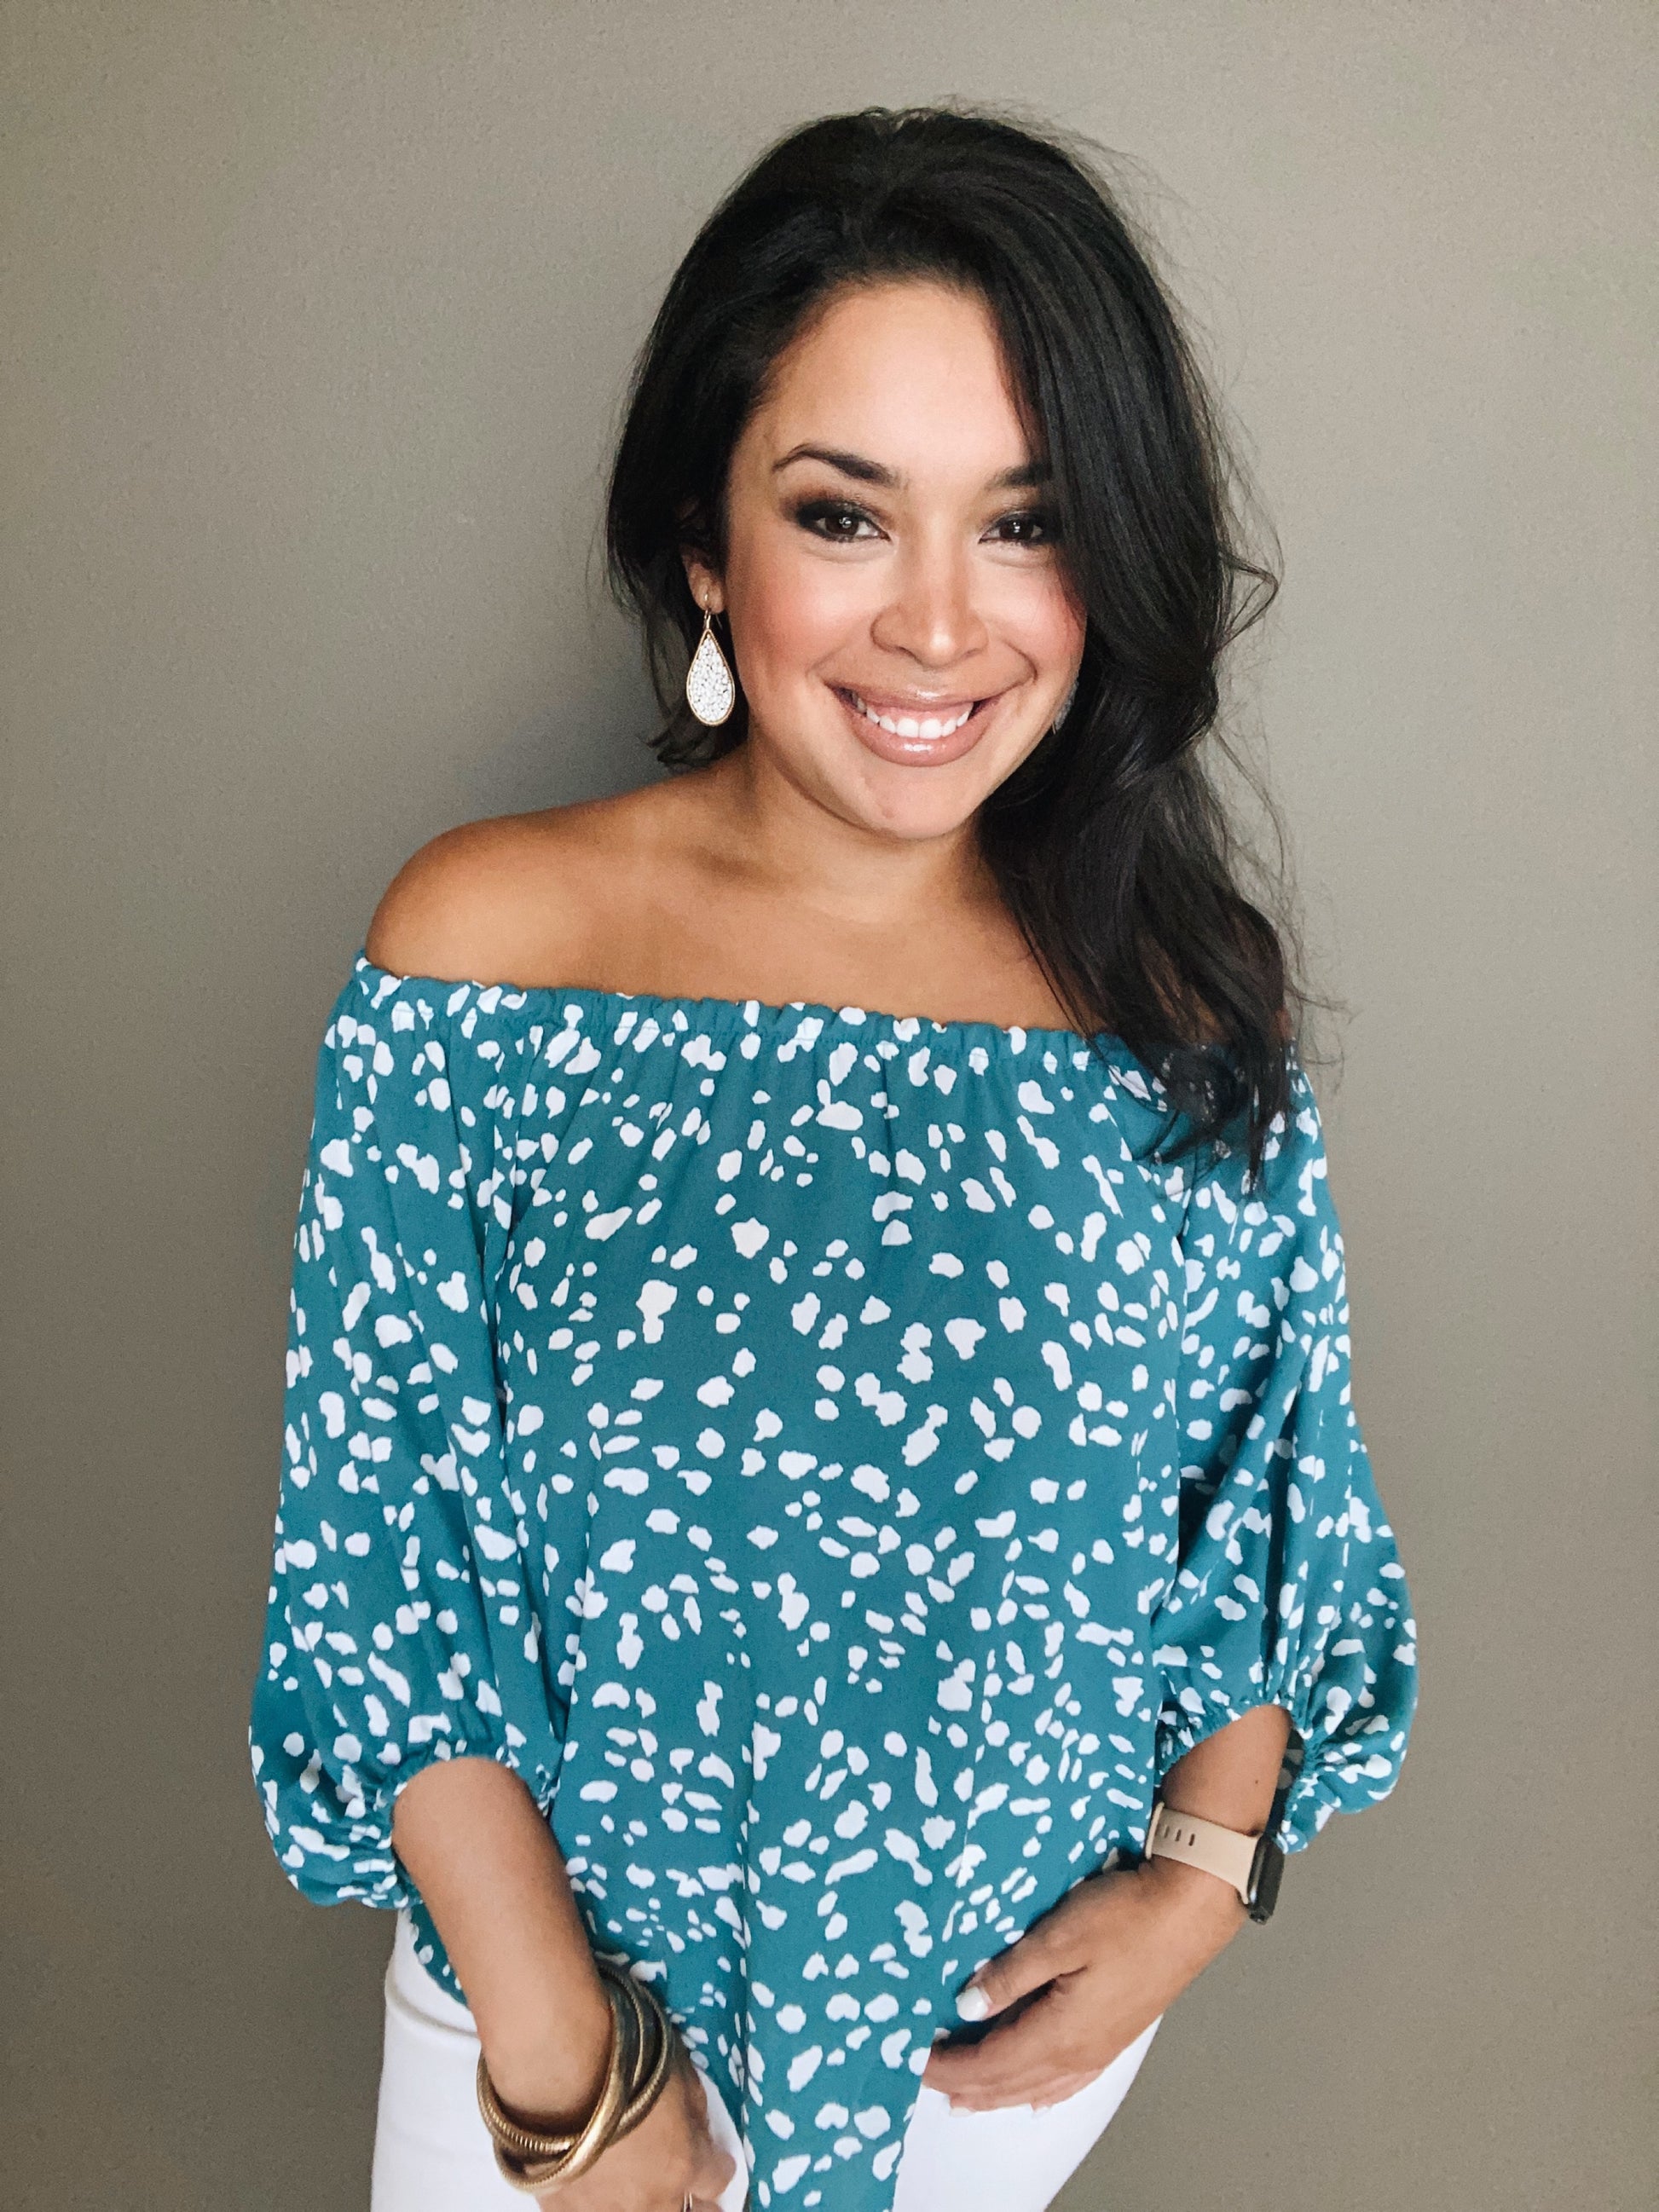 Teal Spotted Off the Shoulder Top - Salud HTX